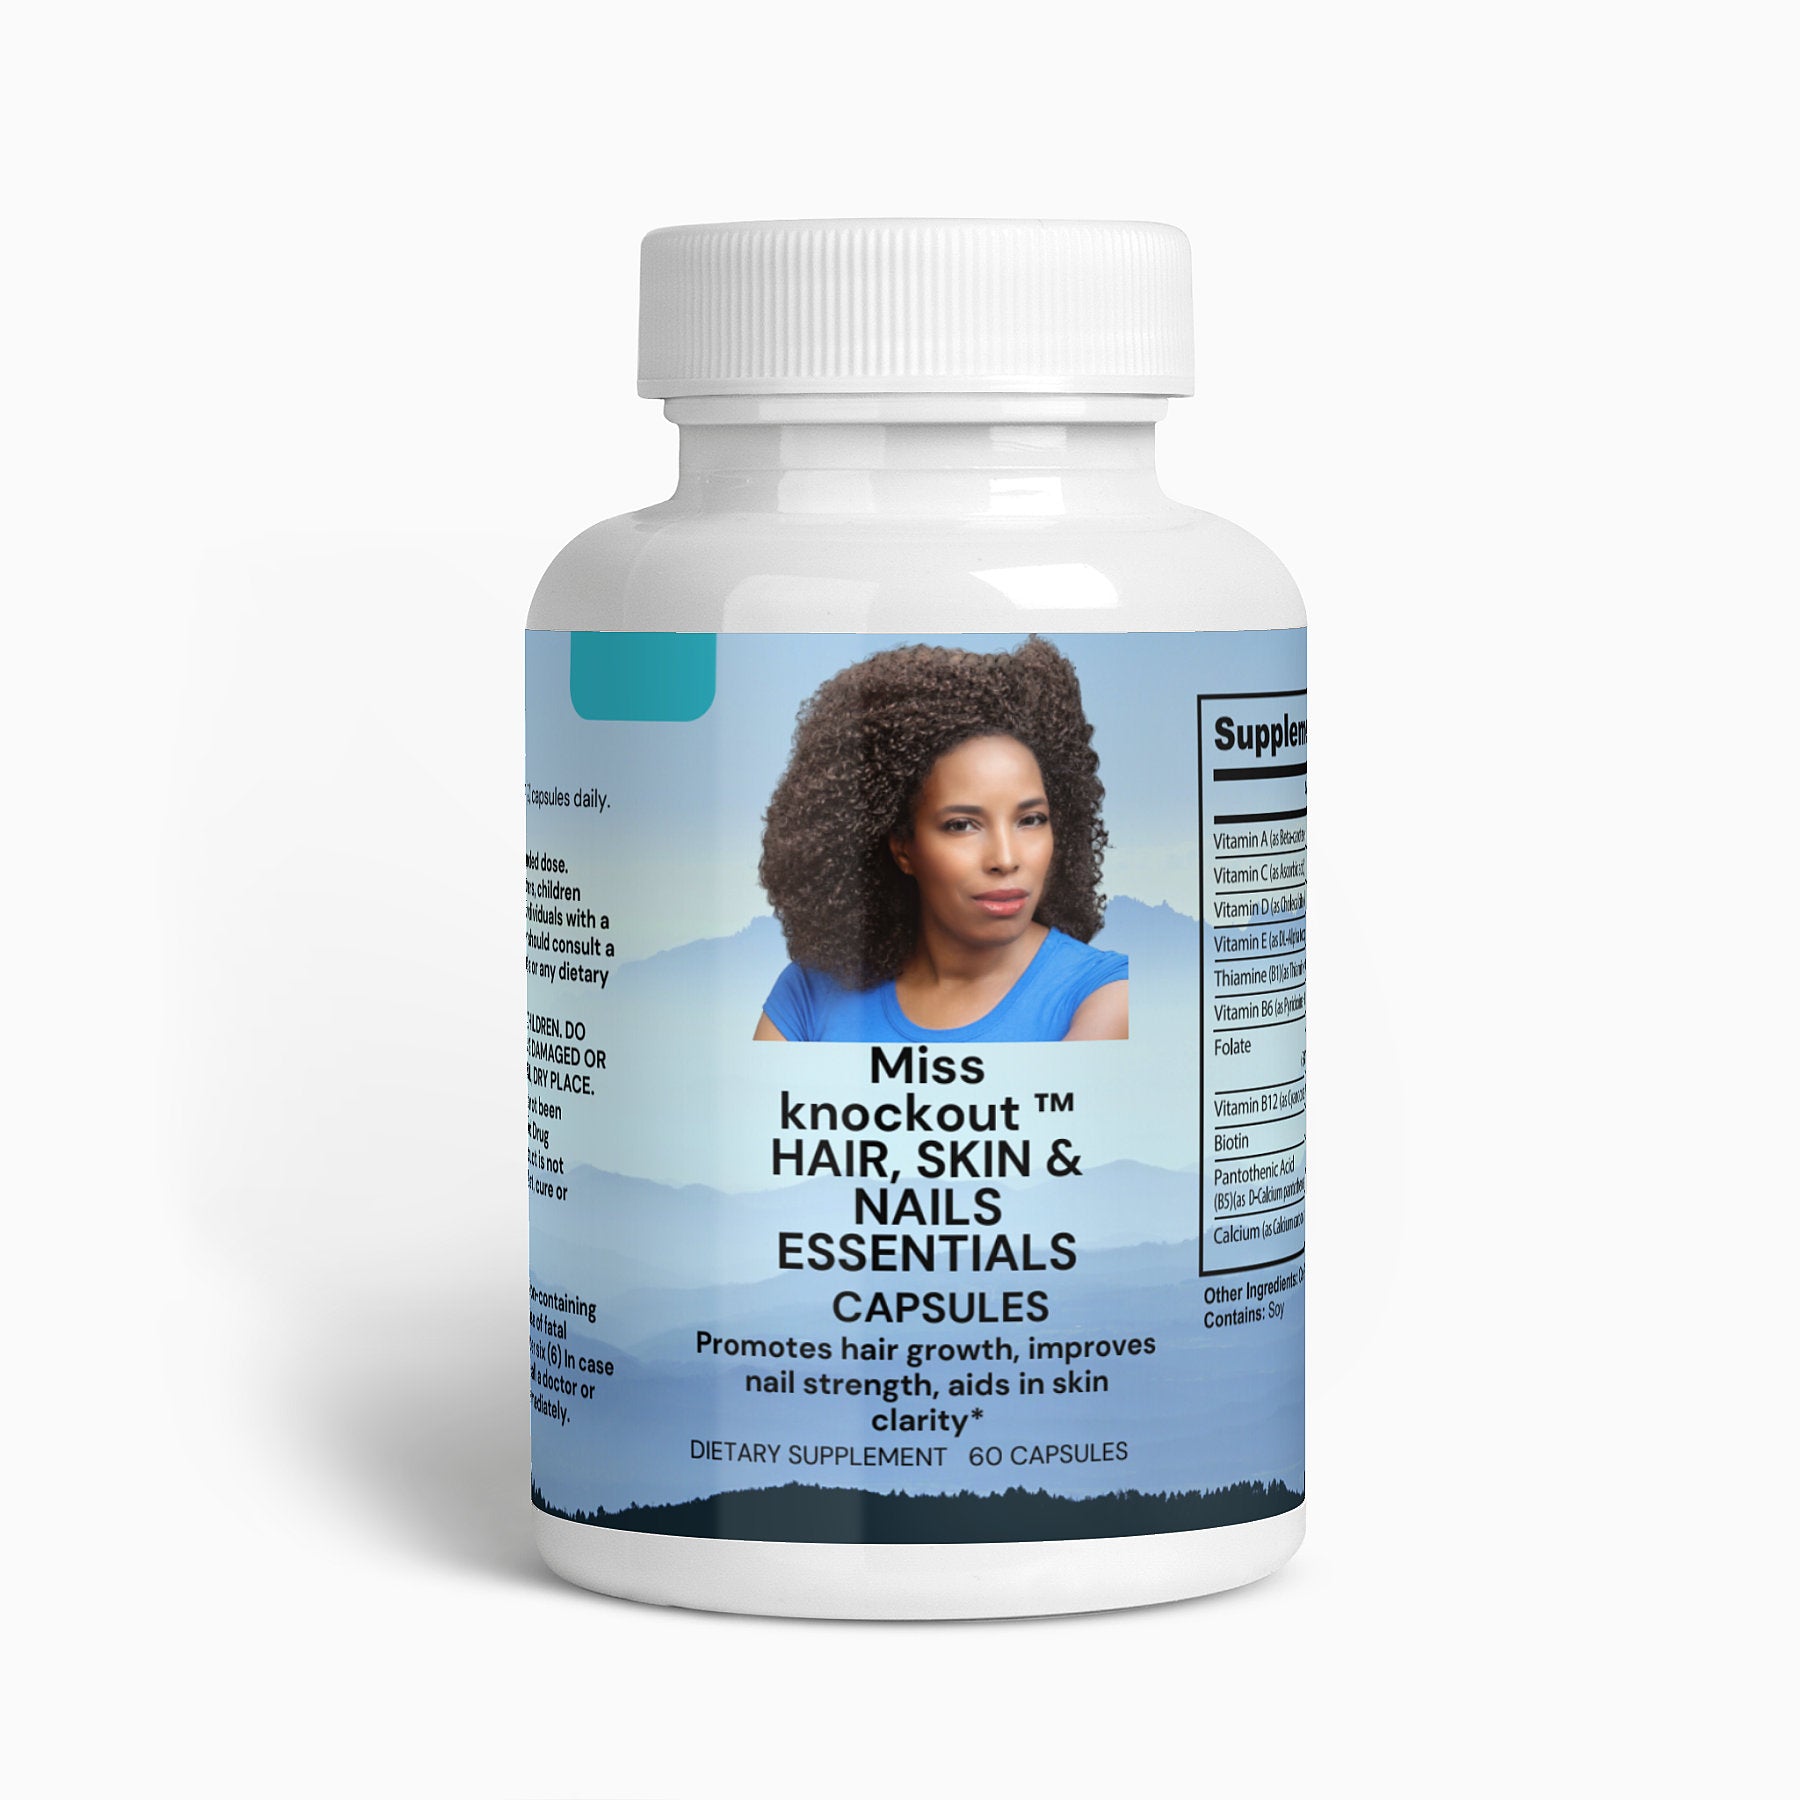 Hair, Skin and Nails Essentials Miss knockout ™ Supplements